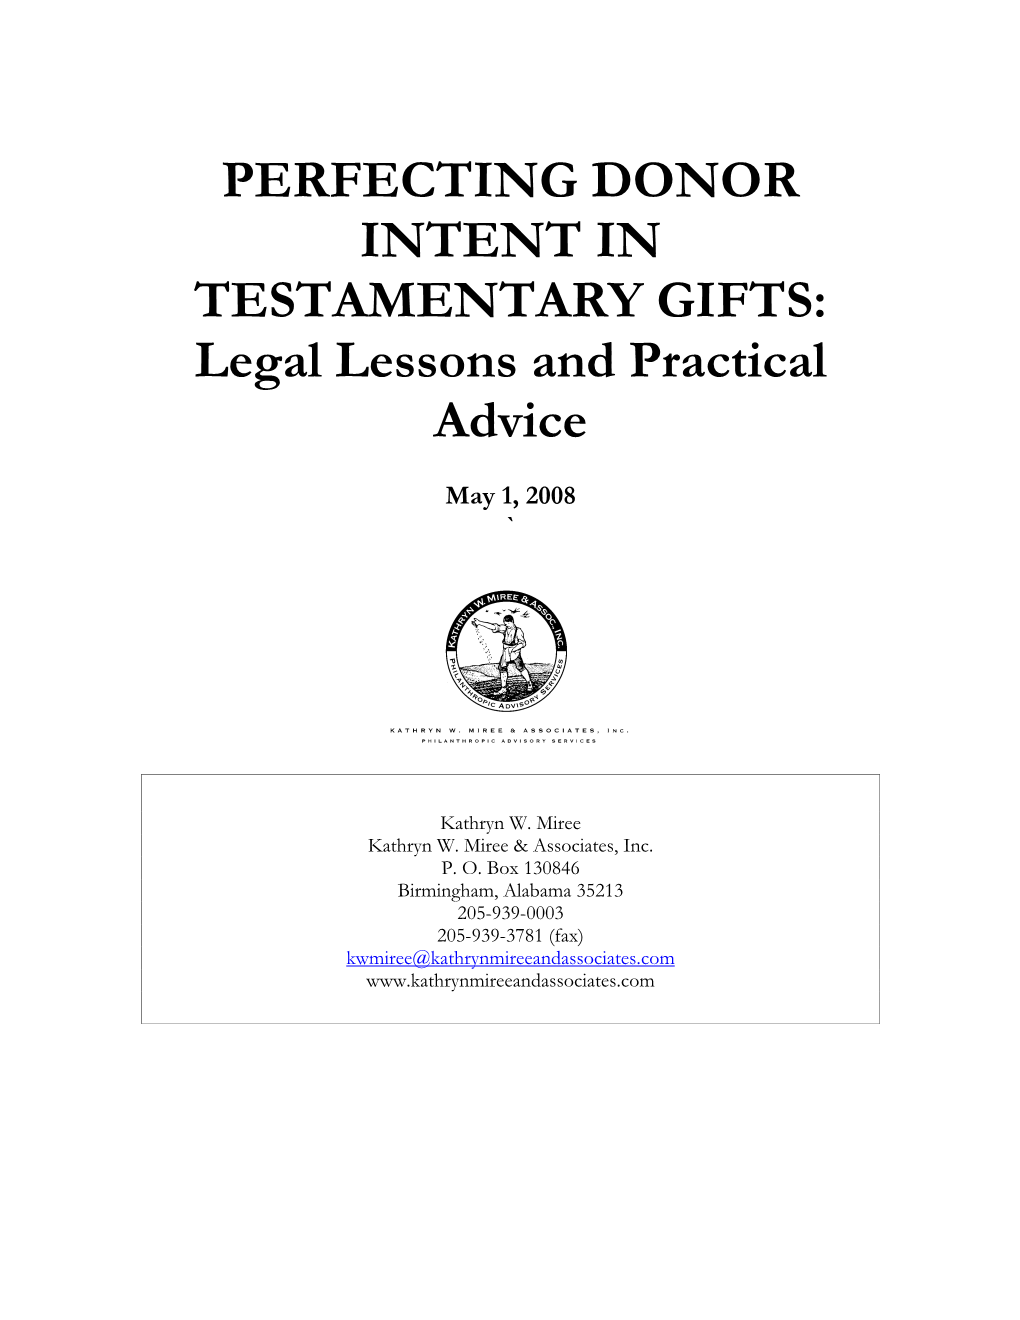 DONOR INTENT in TESTAMENTARY GIFTS: Legal Lessons and Practical Advice